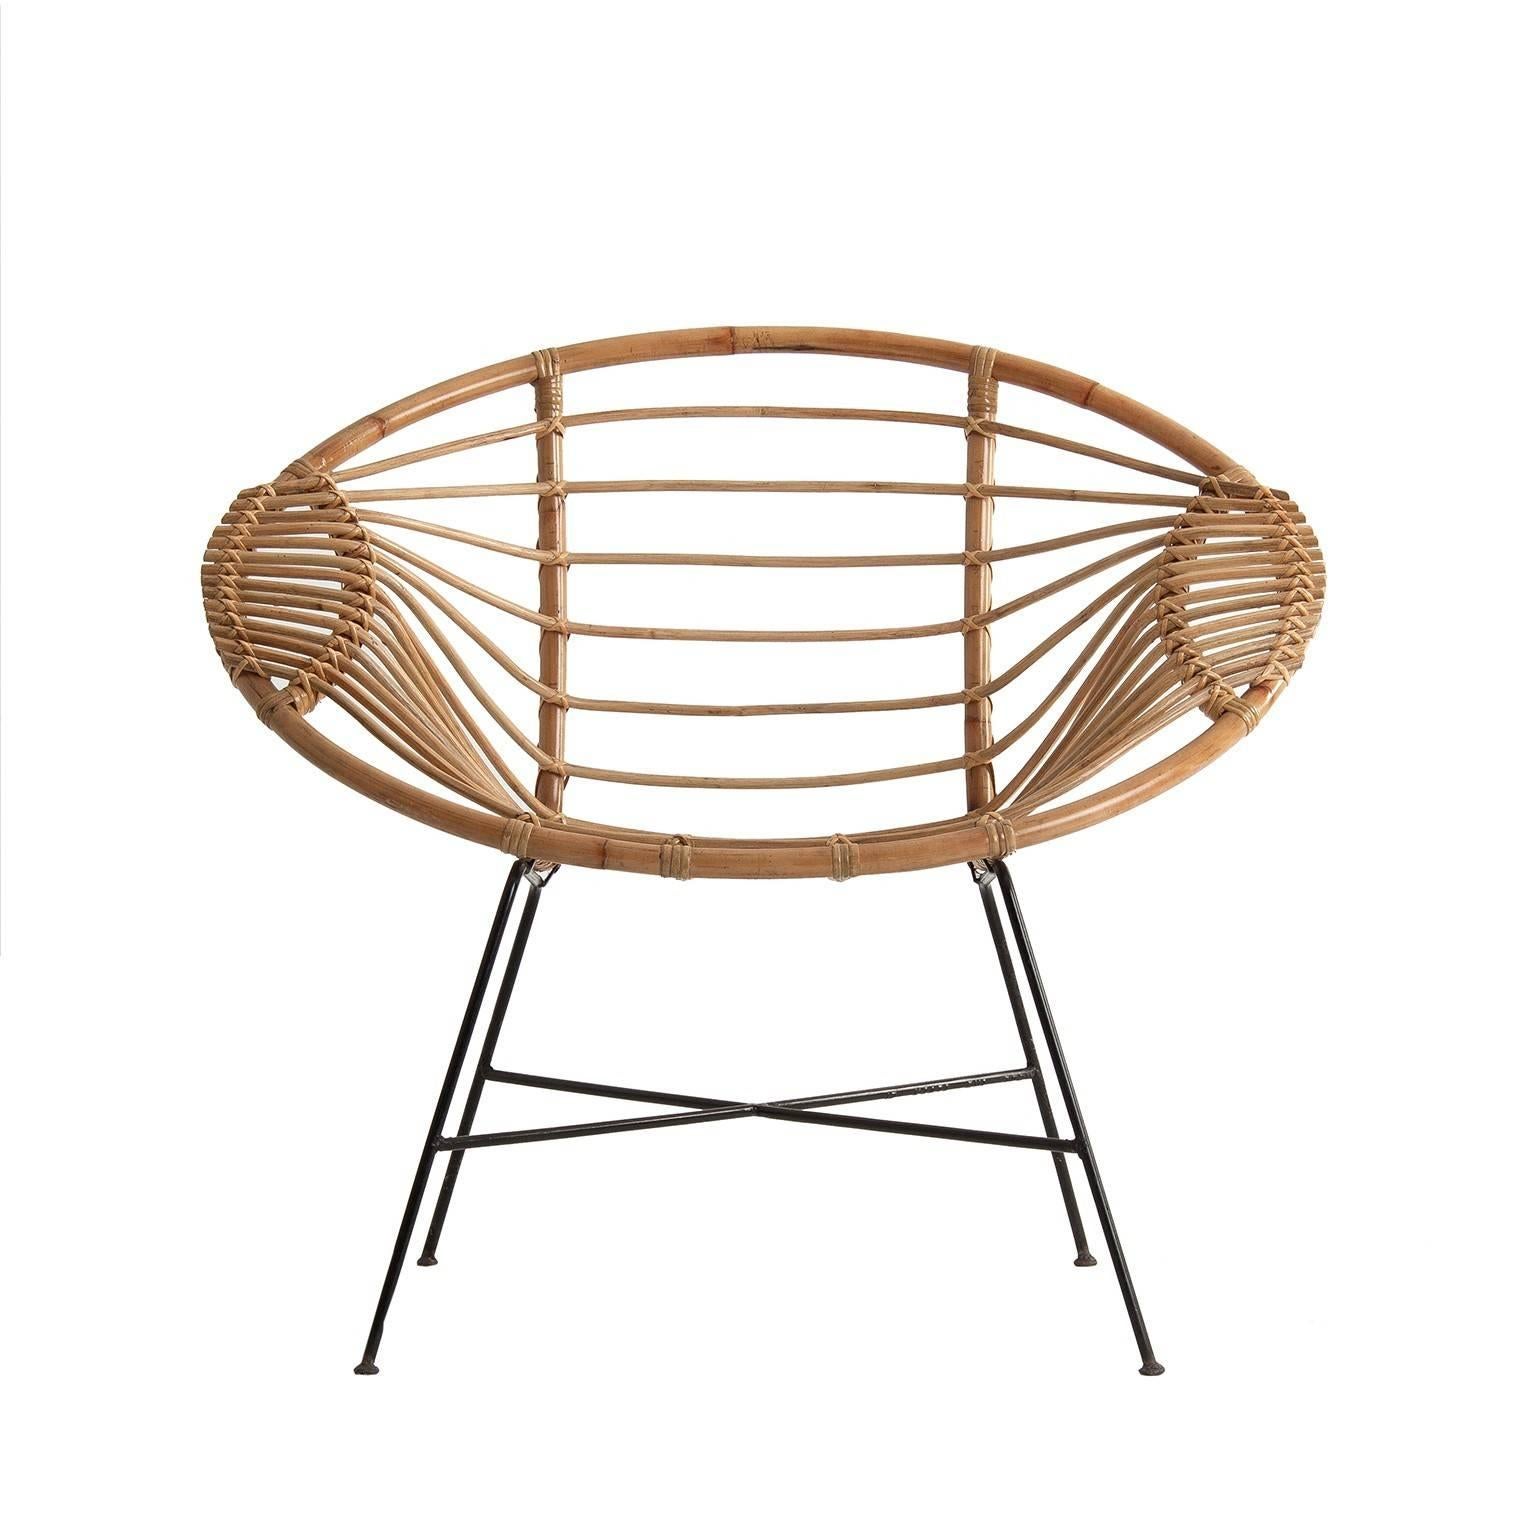 Everyone talks about it, some dream it, everyone wants it, they are very difficult to find and yet it is there, before your eyes; this rattan lounge chair in the style of Janine Abraham and Dirk Jan Rol.
And in addition in excellent condition (new